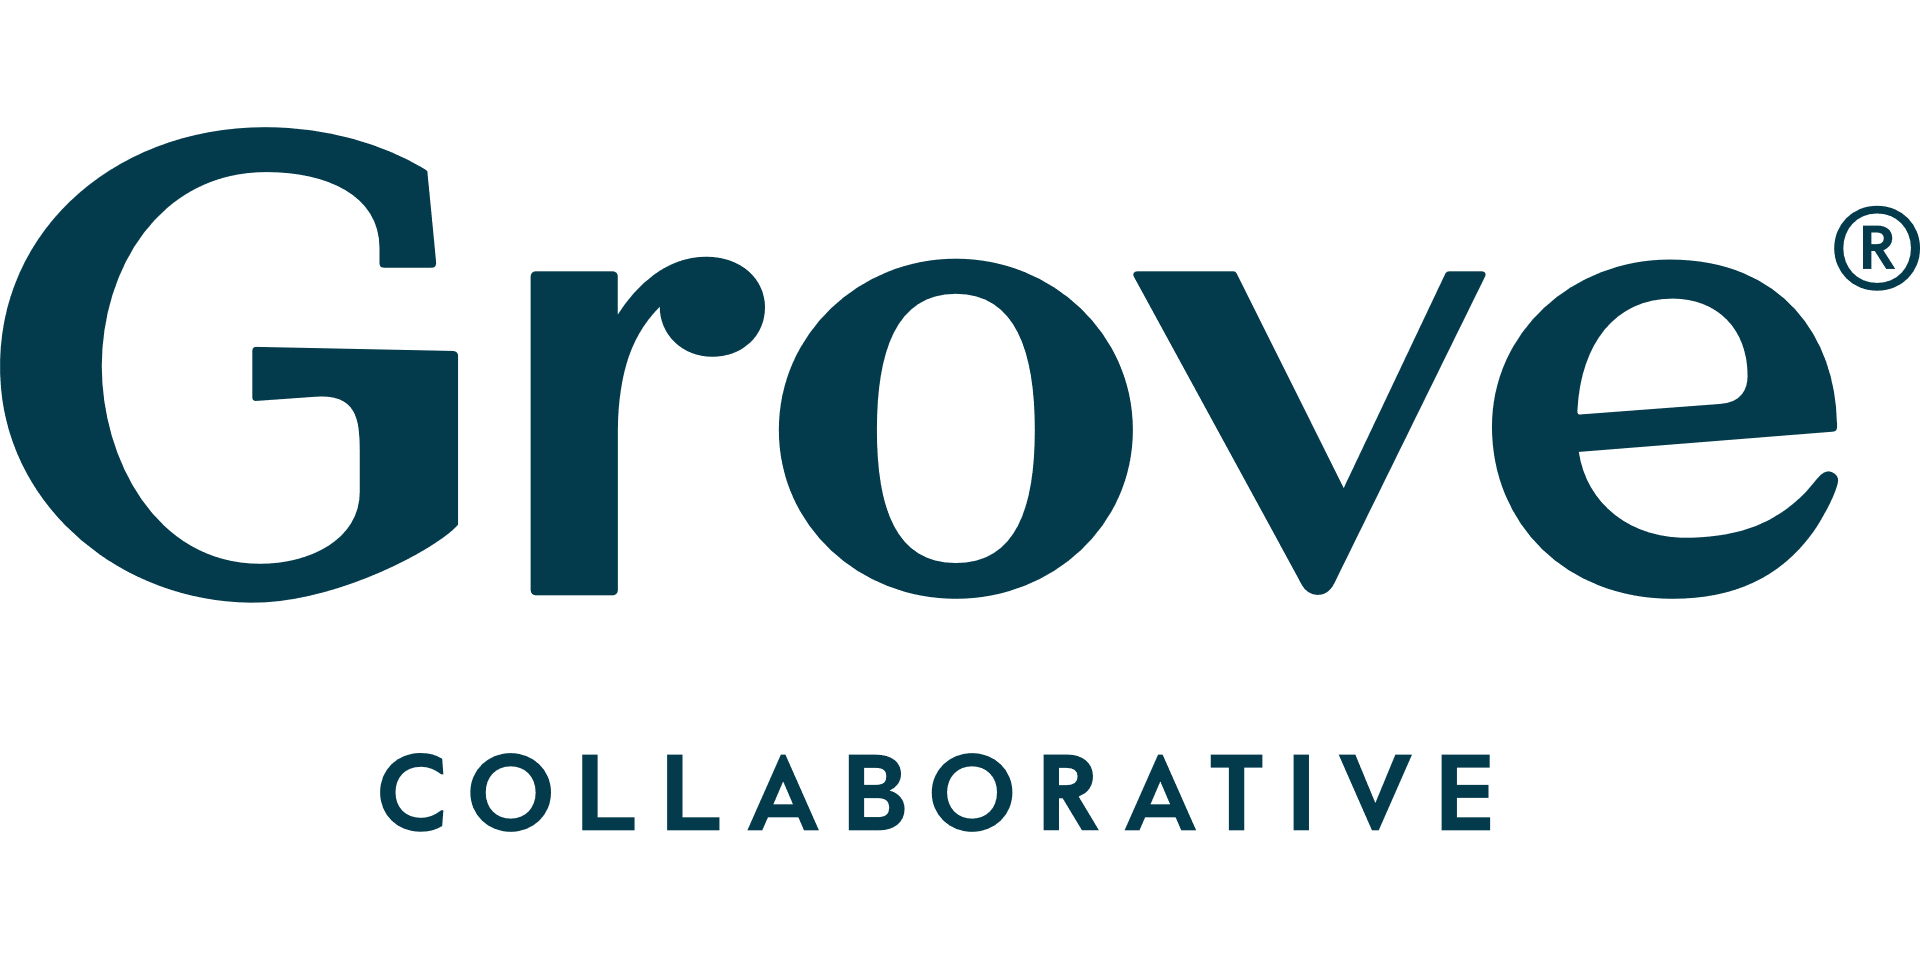 Grove Collaborative Launches Grove Wellness, a Personalized Online